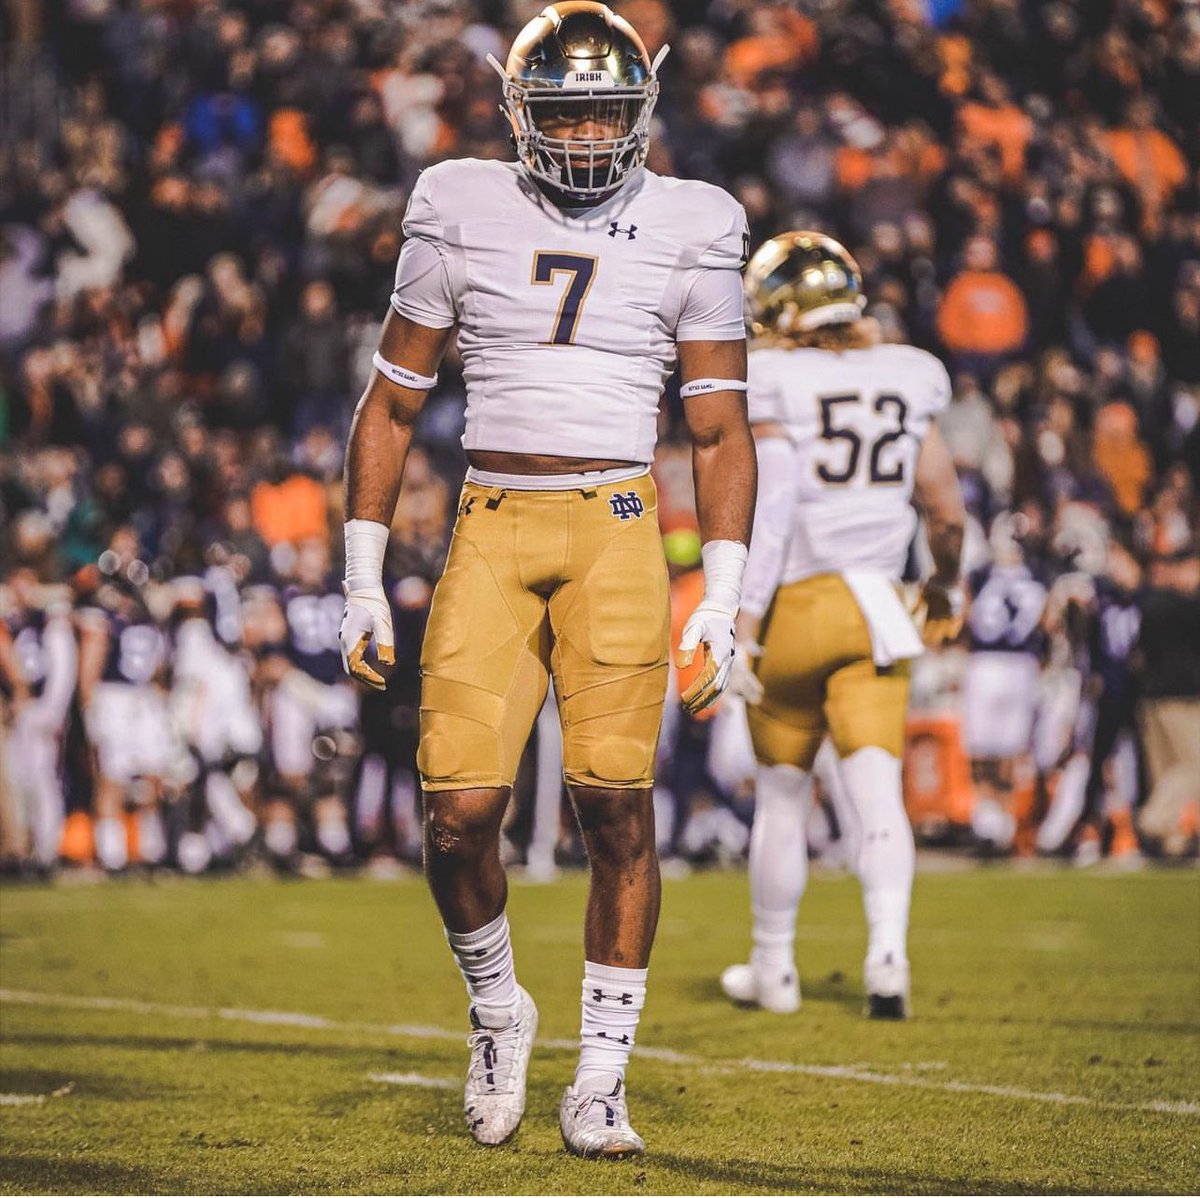 #AGTG Blessed to receive an offer from @NDFootball Thank you Coaches for offering me!! 🍀 #thankyoulord @dzoloty @TomLoy247 @adamgorney @JohnGarcia_Jr @CraigHaubert @ByKyleKelly @DemetricDWarren @TJamesND @NotreDame247 @CoachWash56 @NickSebas_ @CoachAlGolden @Marcus_Freeman1